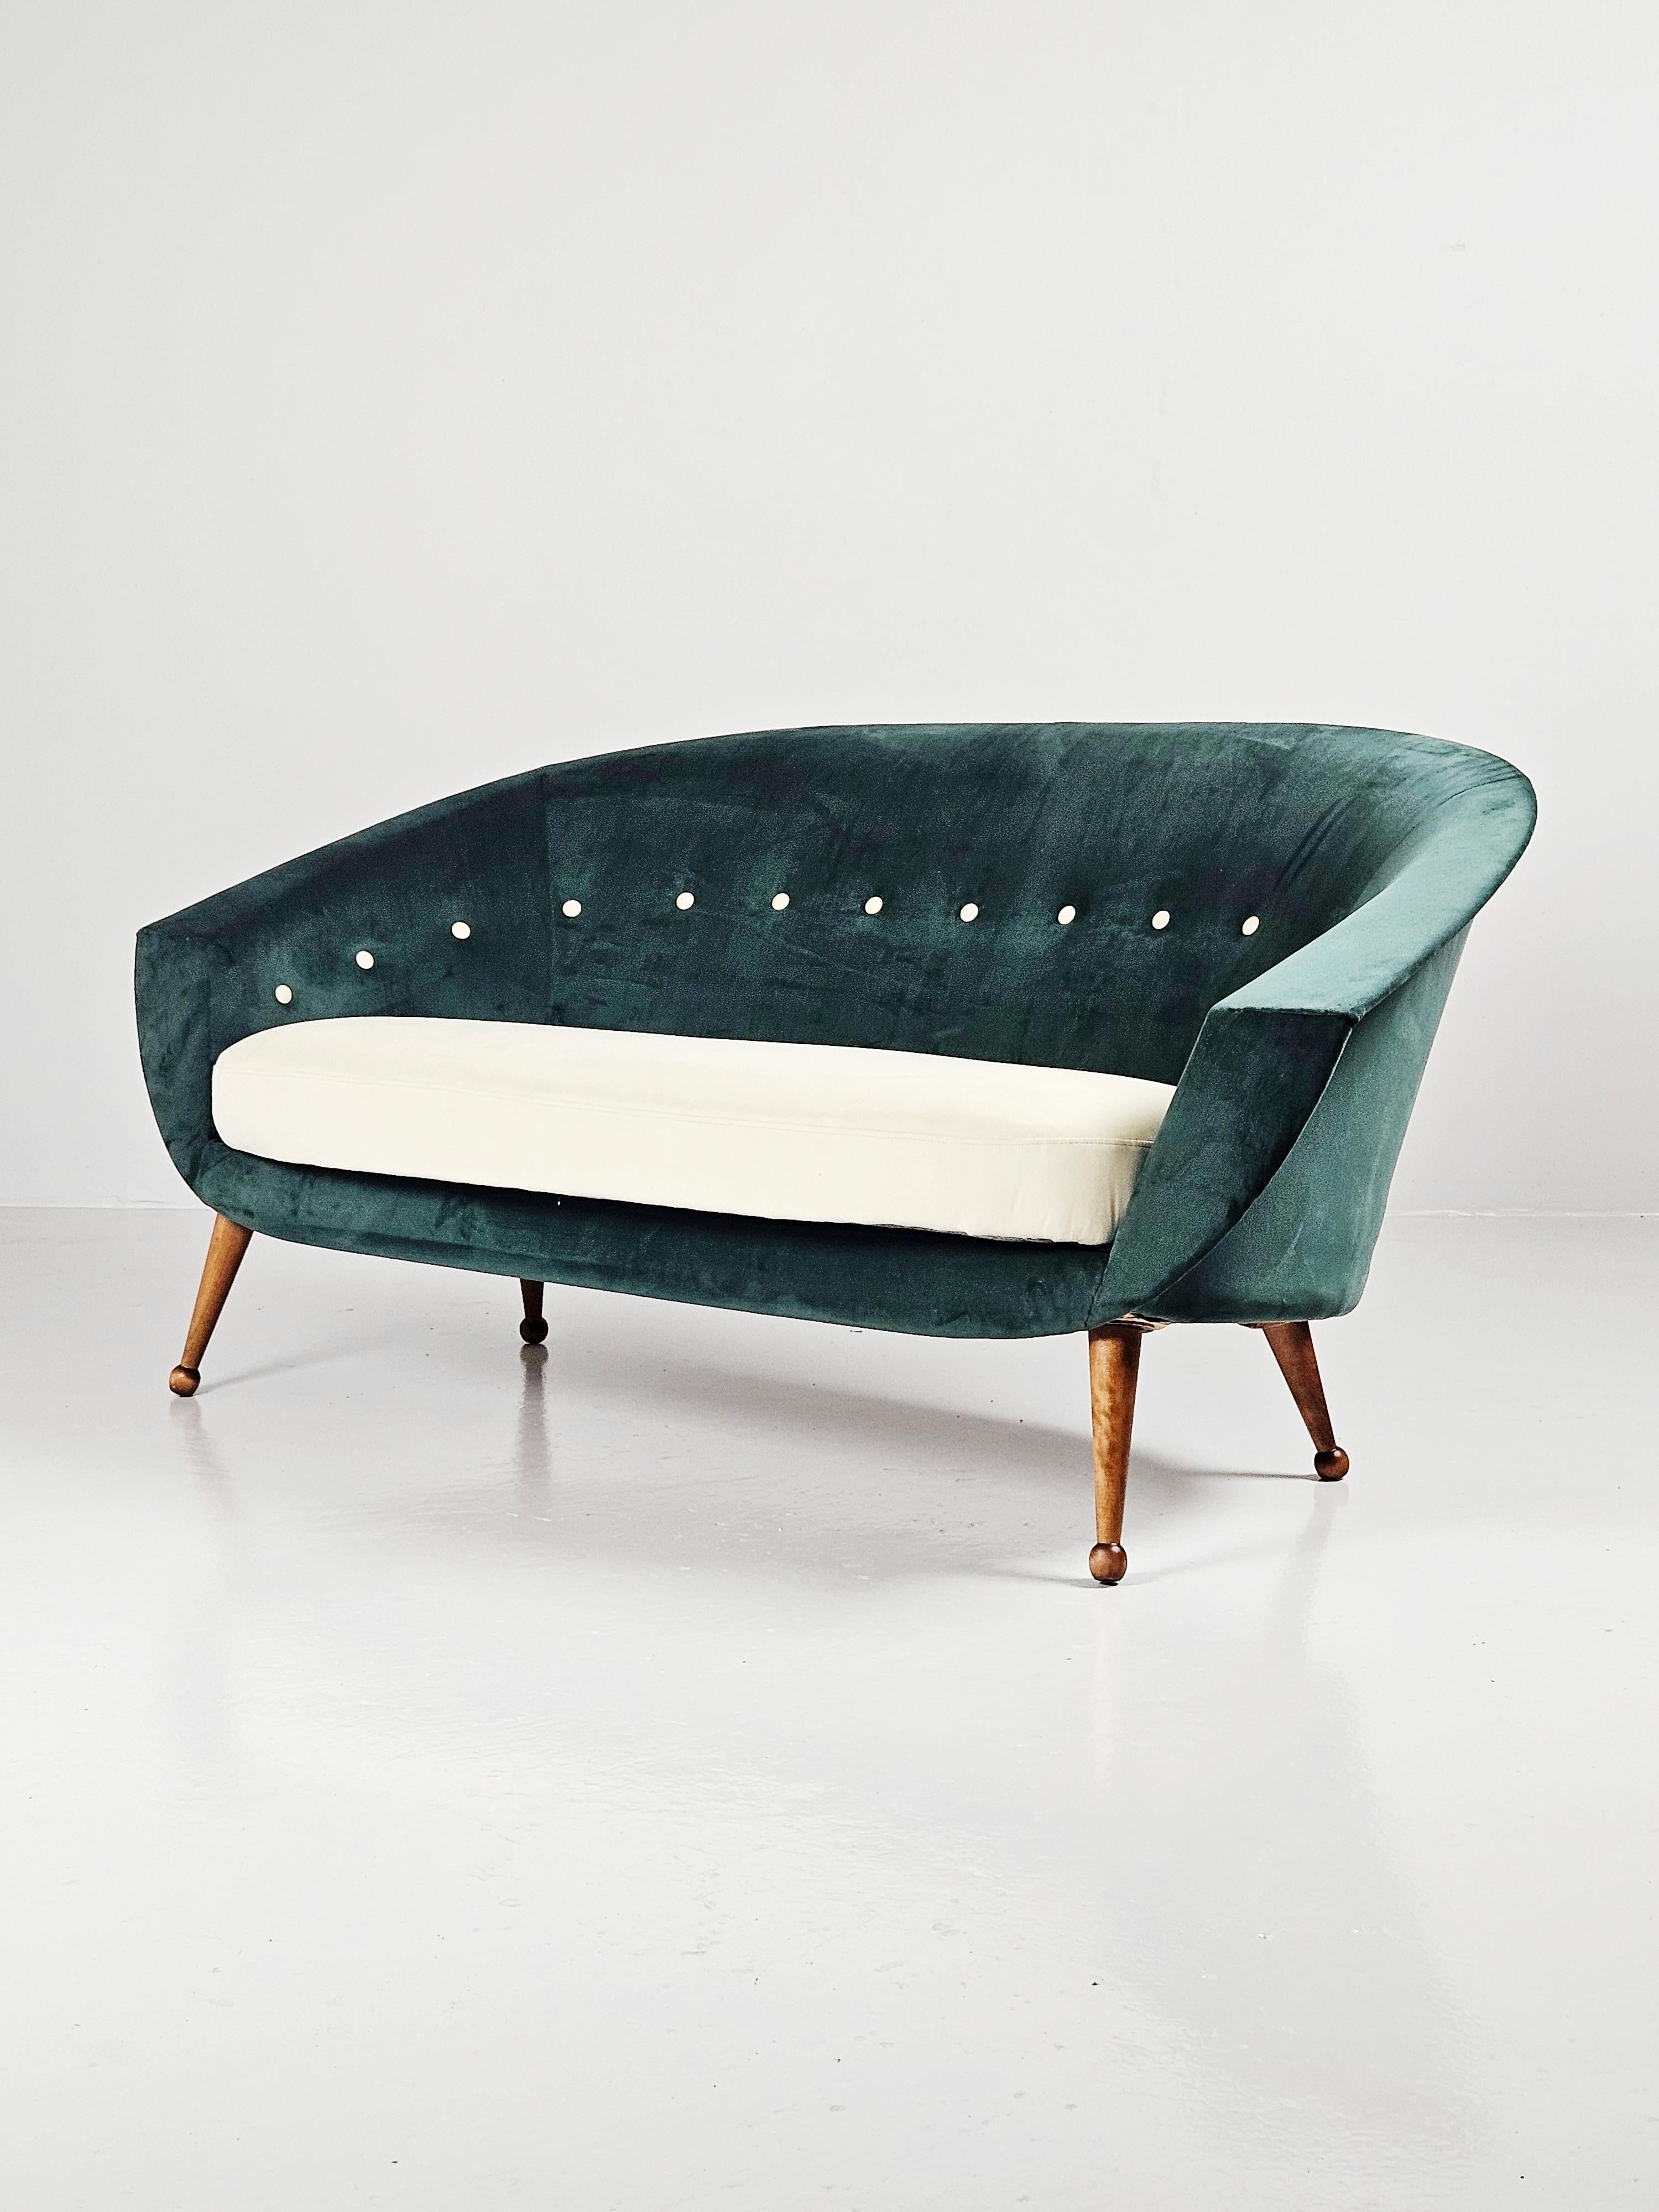 Rare sofa model 'Tellus' designed by Folke Jansson and produced by SM Wincrantz, Sweden, during the 1960s. 

Sculptural legs of beech and upholstered in two different tones of green fabric. 